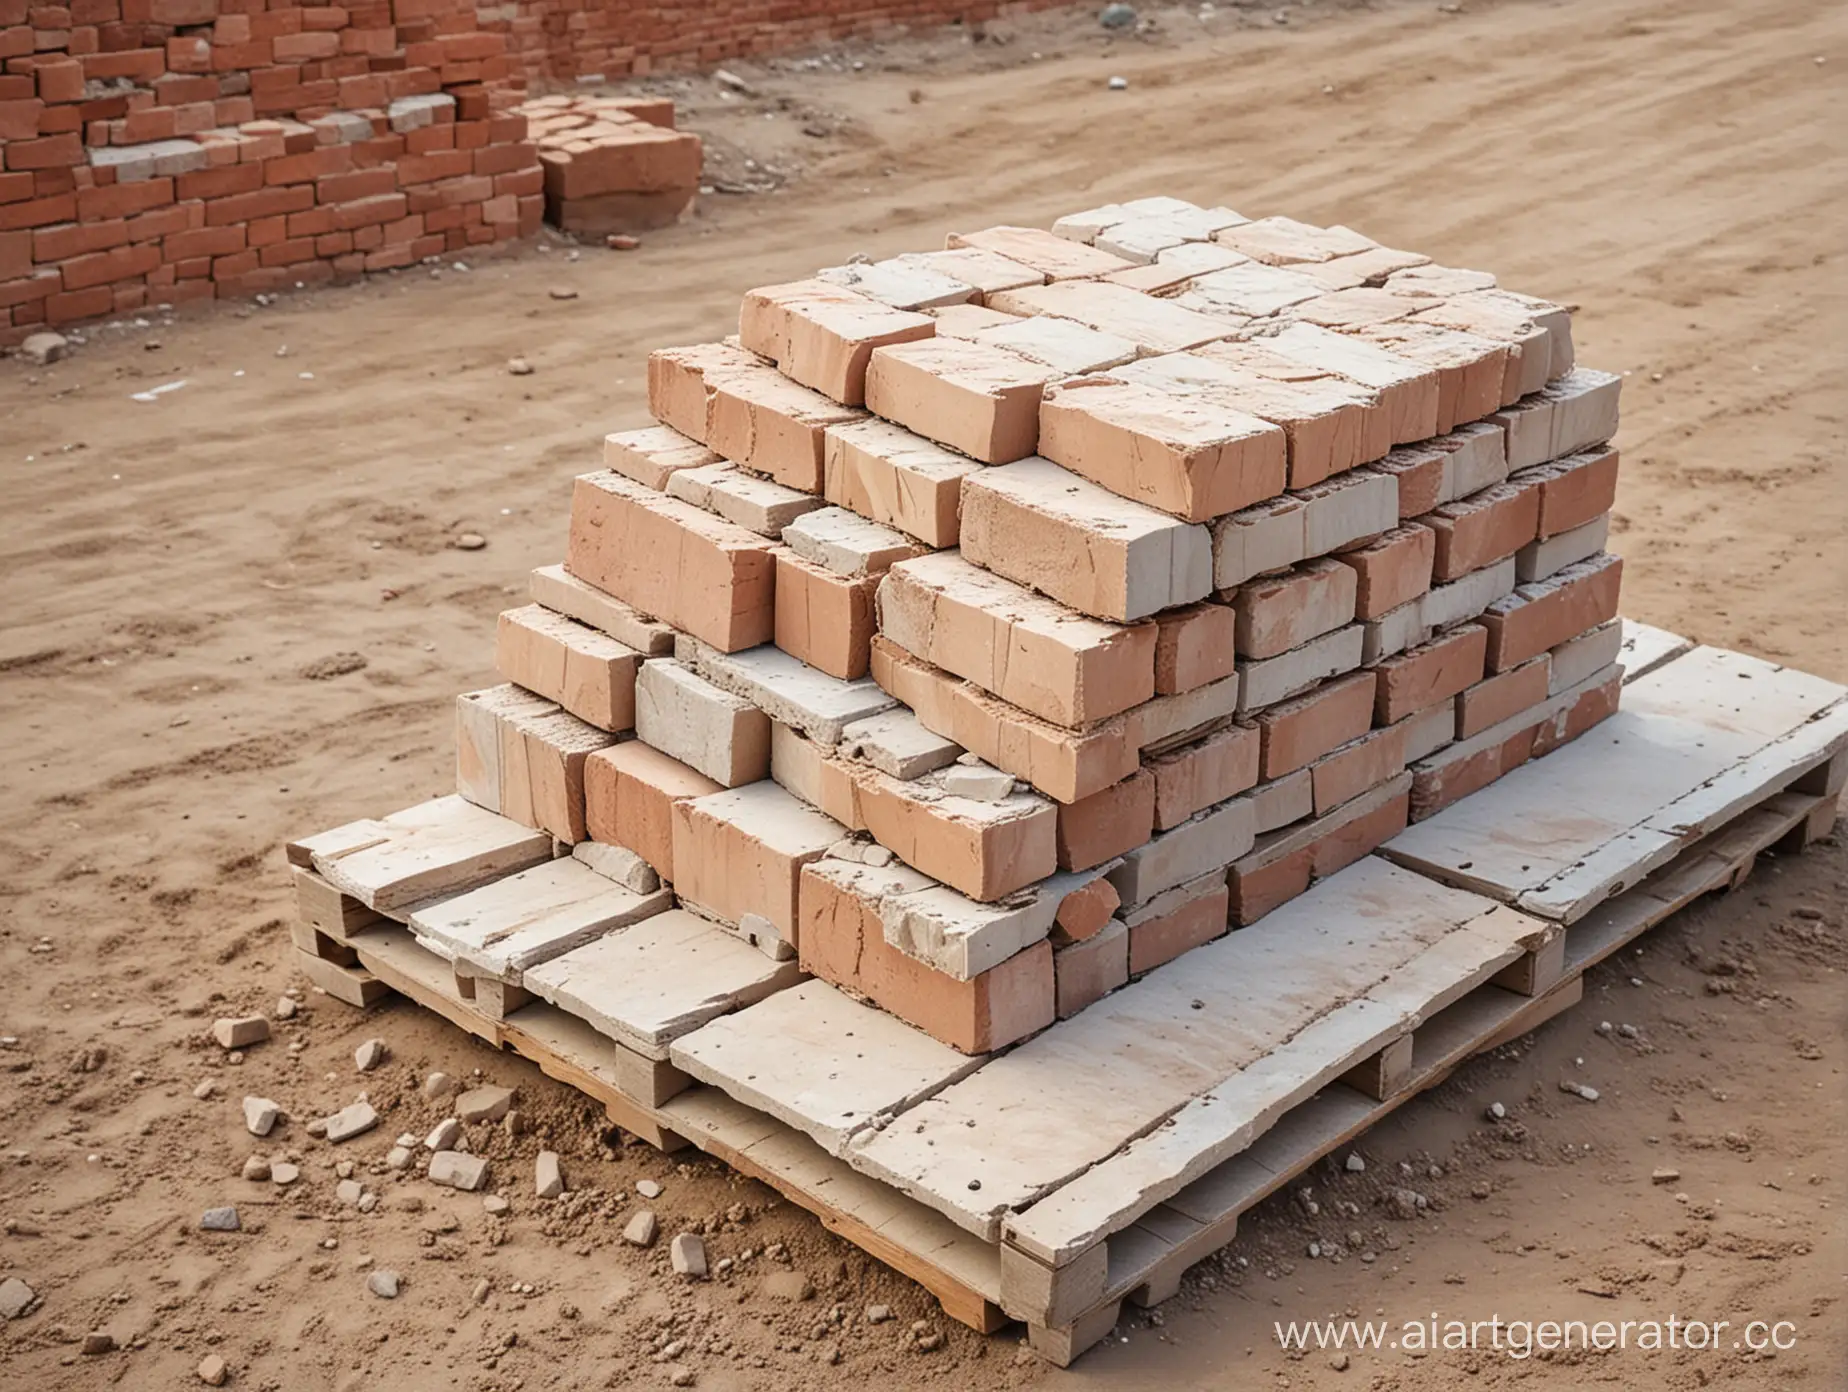 Construction-Site-with-Bricks-on-Pallet